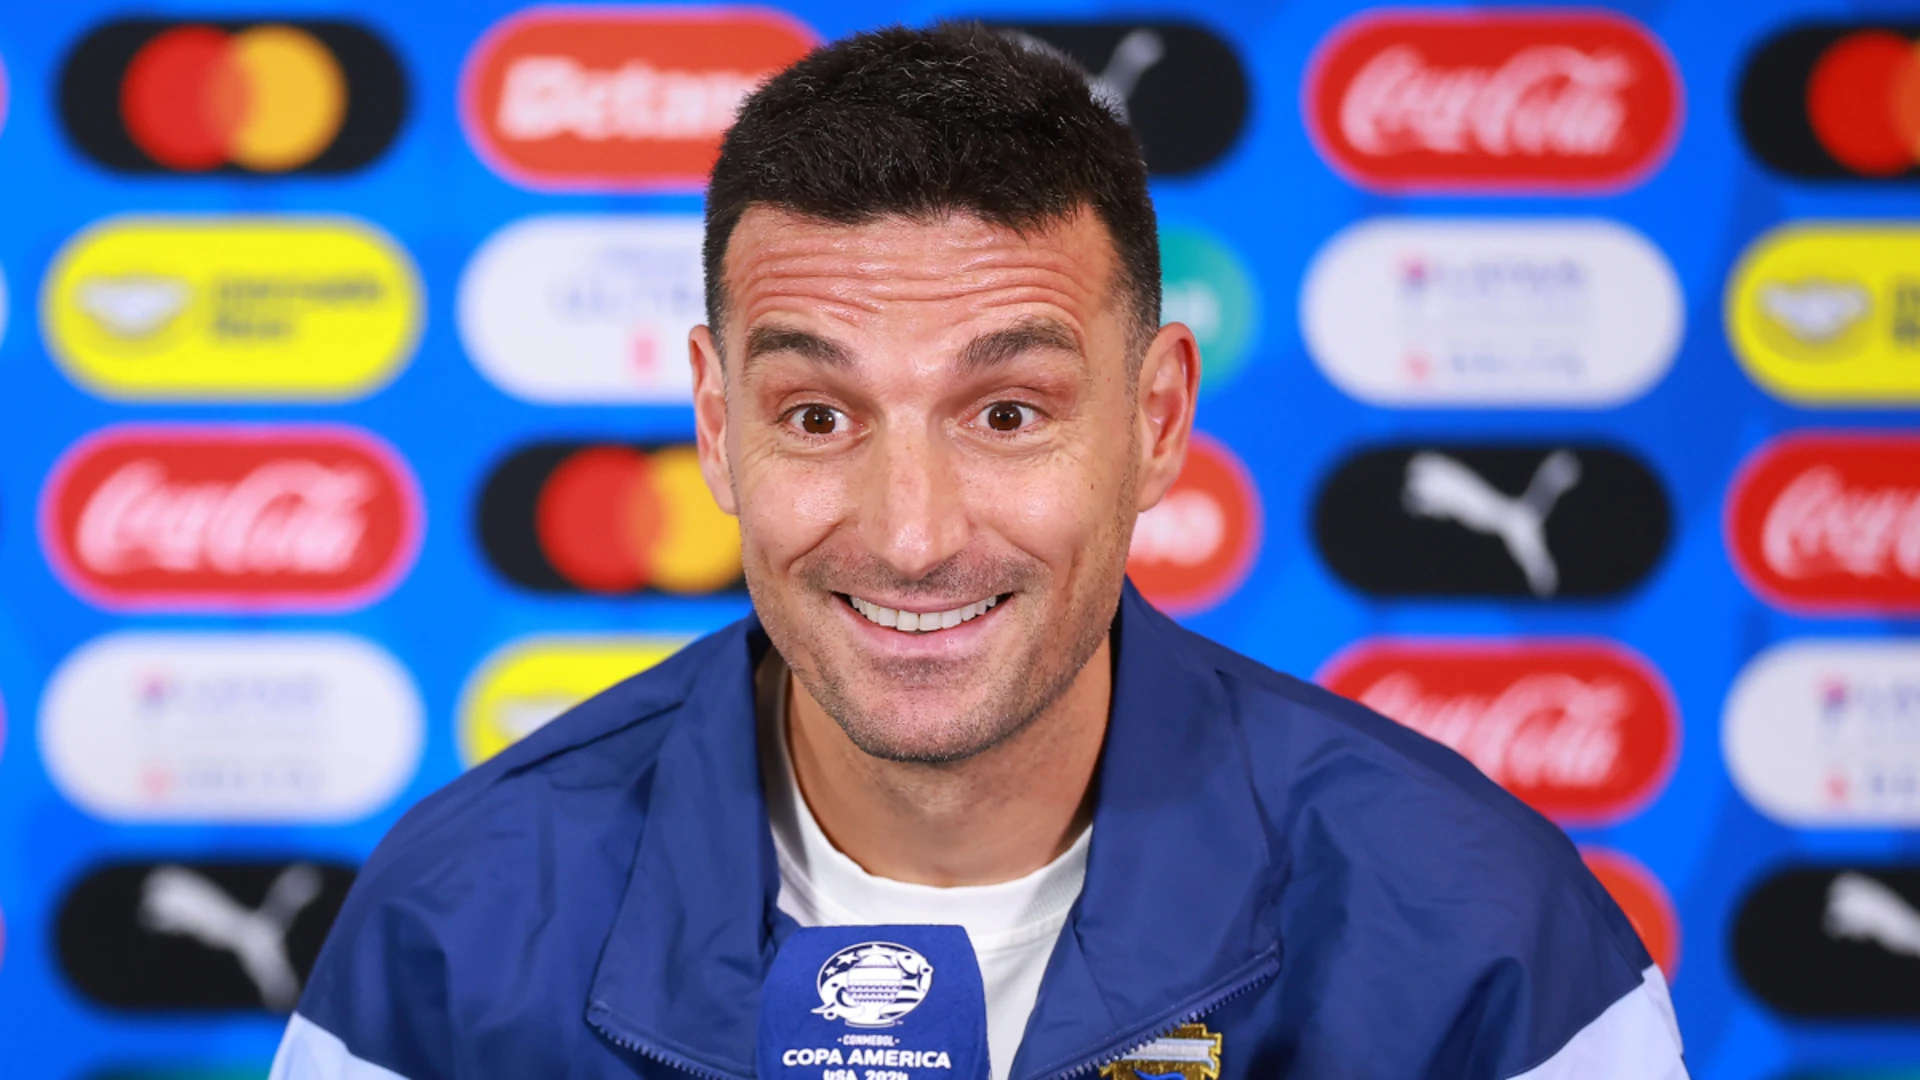 Argentina's Scaloni says balance is key in deciding who starts up front